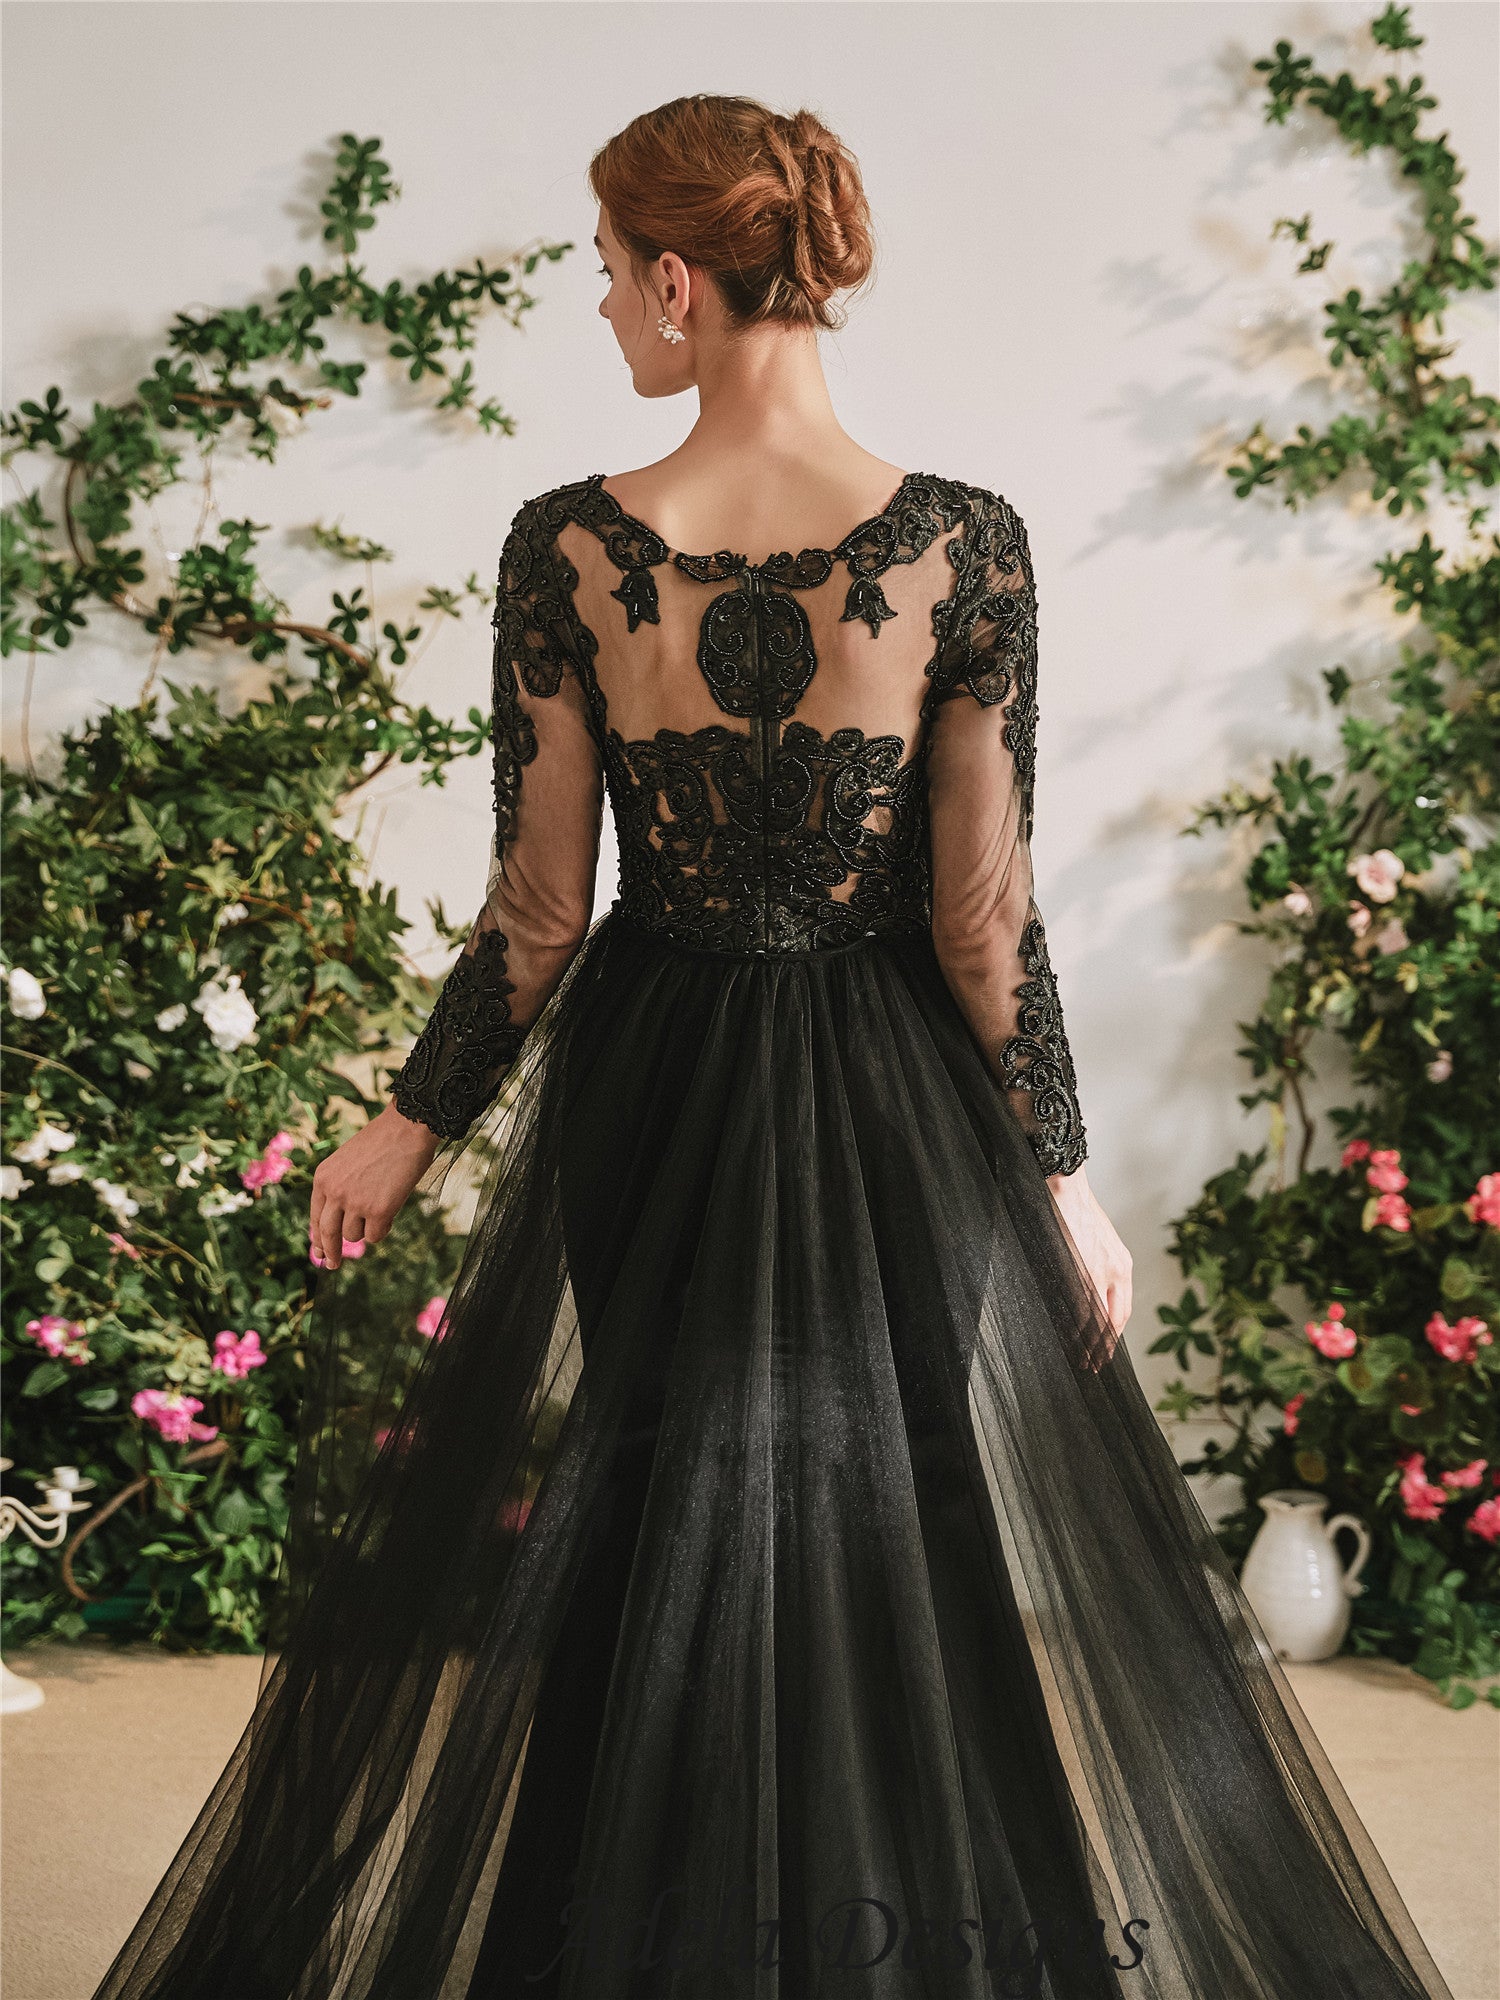 Black Leaf Lace Wedding Dress with Off-the-Shoulder Sleeves | Martina Liana